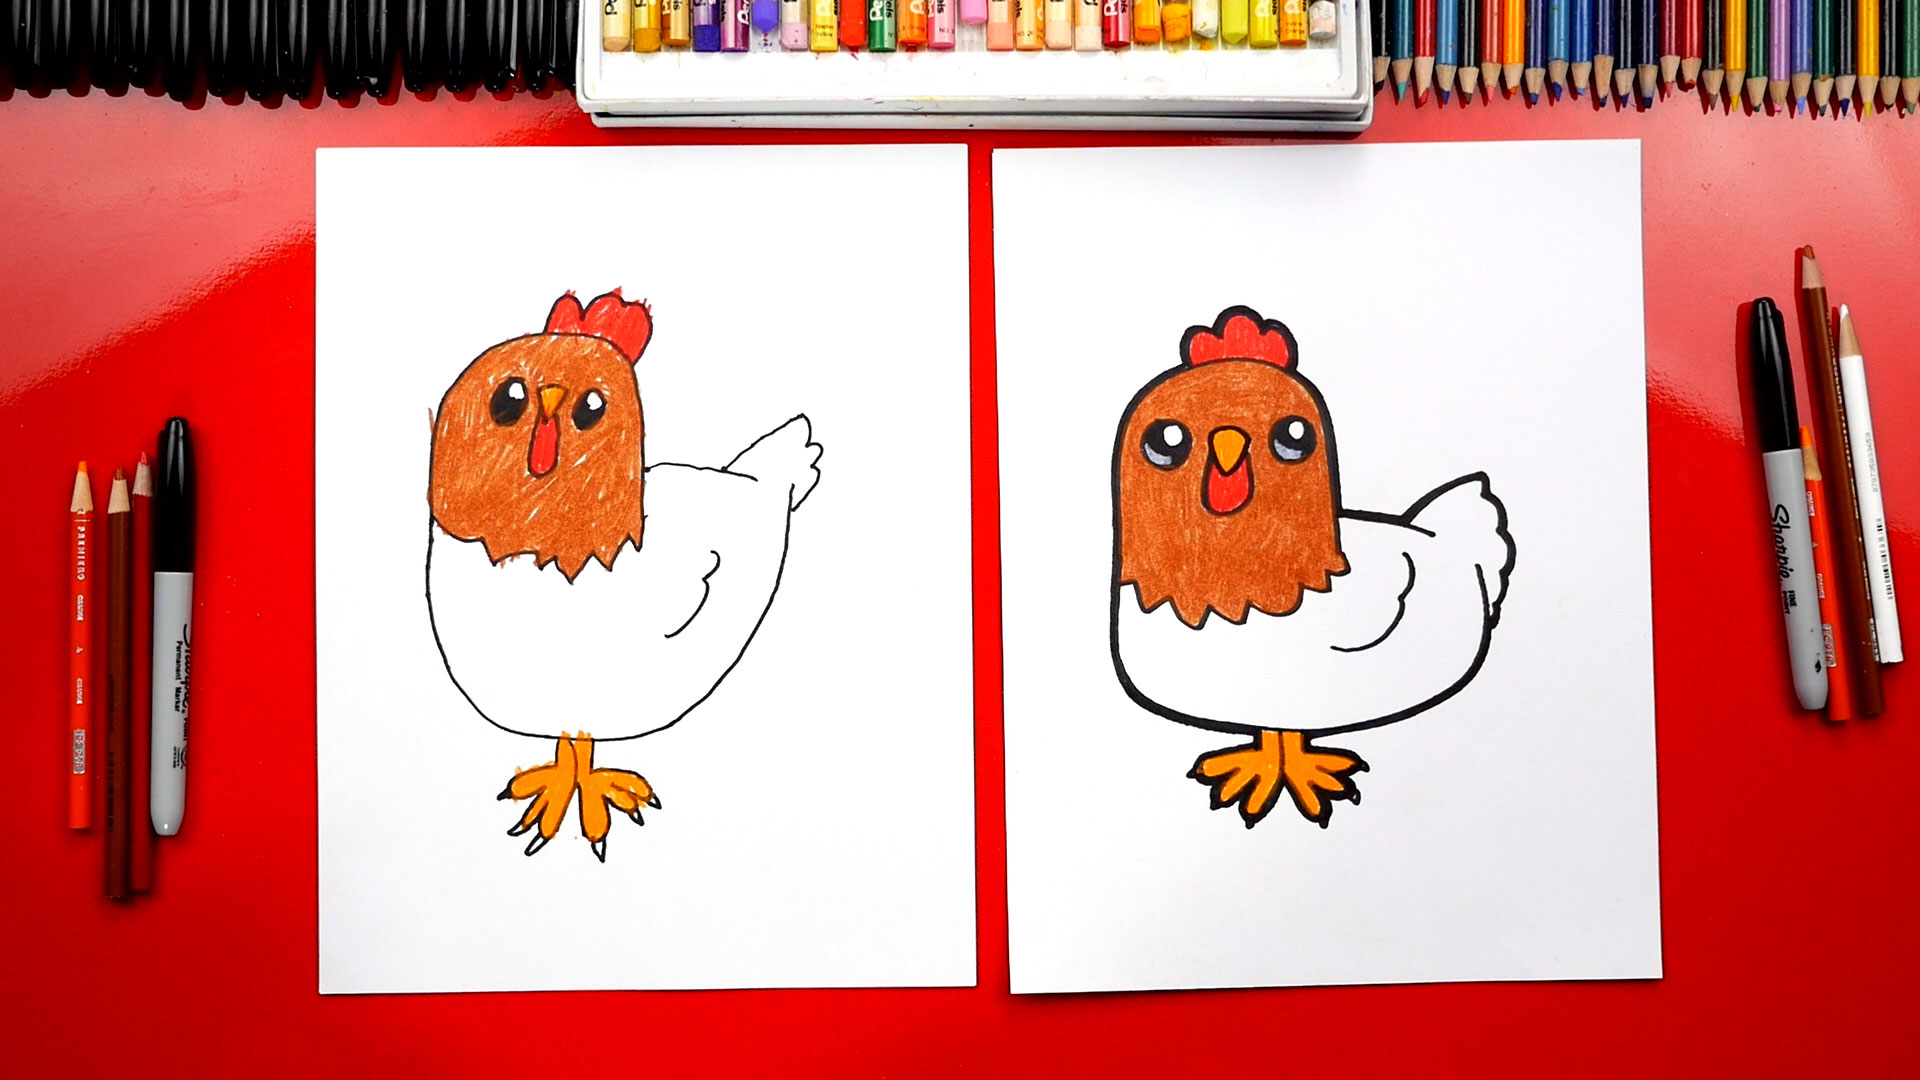 How To Draw A Chicken by Easydrawforkids - Make better art